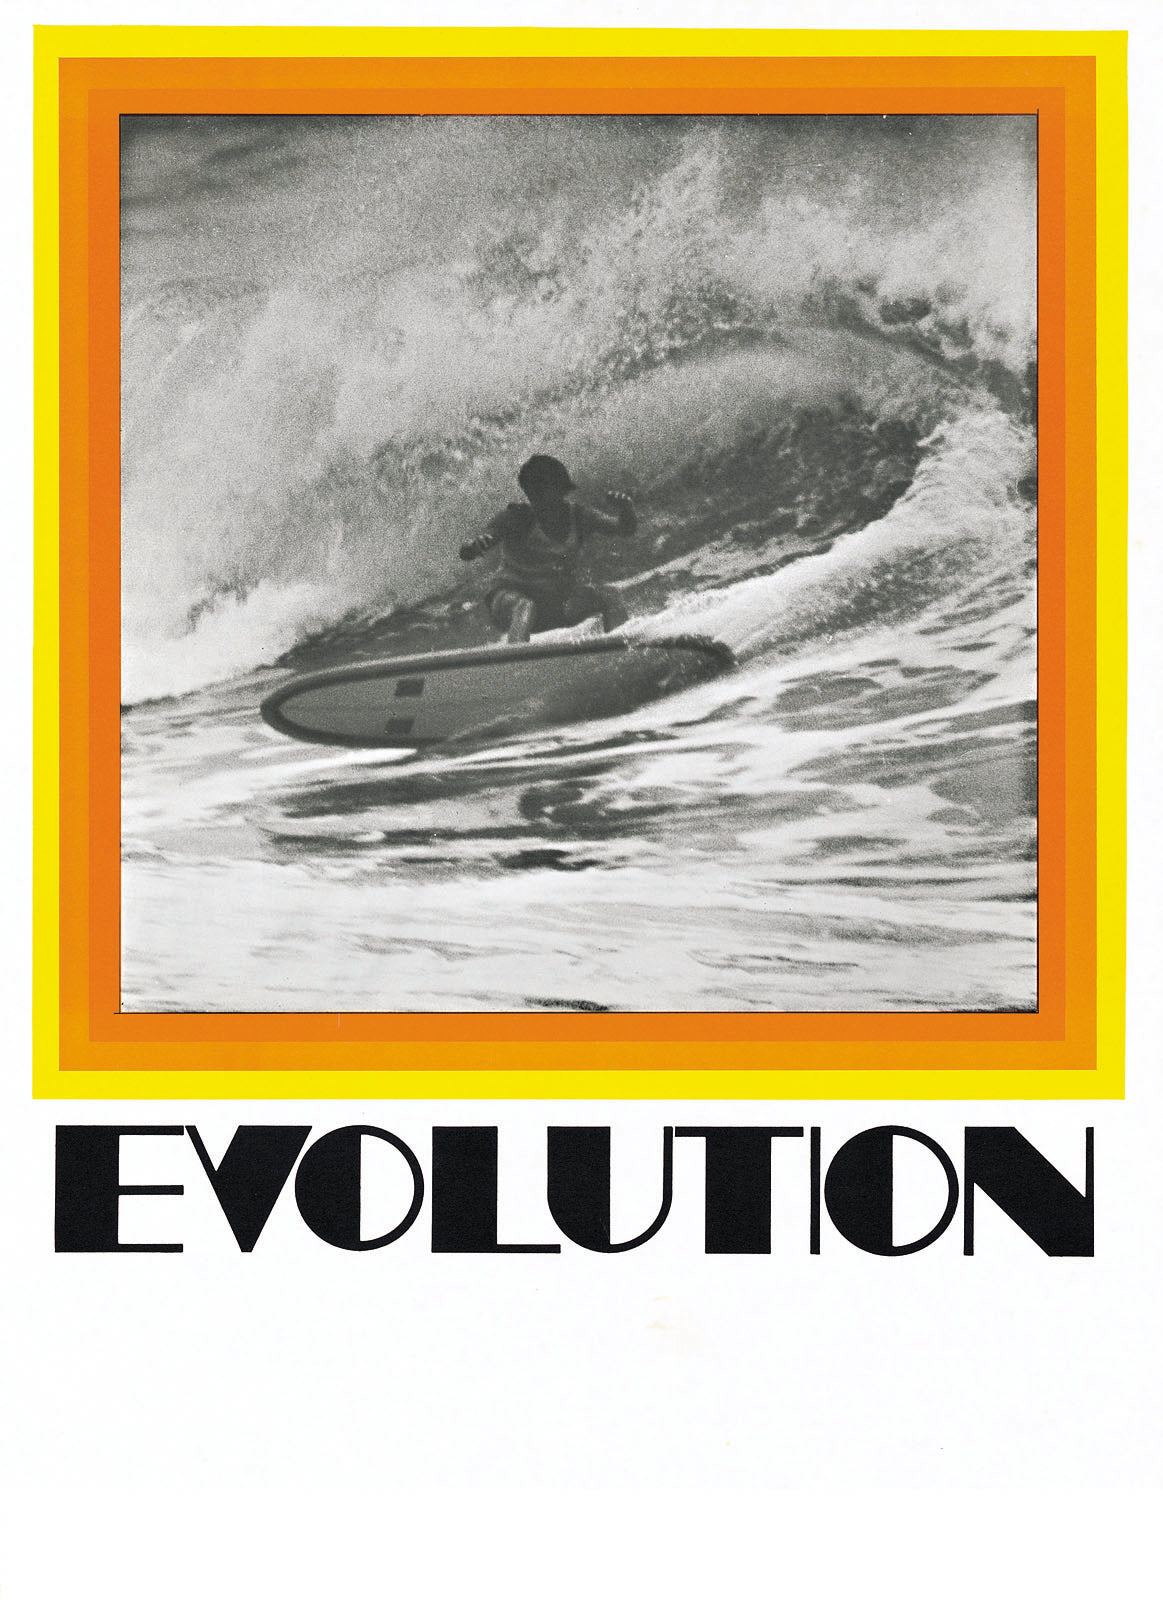  Evolution Large. 1969 Original release poster featuring John Pennings' famous photo of Wayne Lynch at the Australian Championships in Sydney in May 1968. Small scuffs but otherwise in excellent condition. 455mm x 640mm.                    $395.